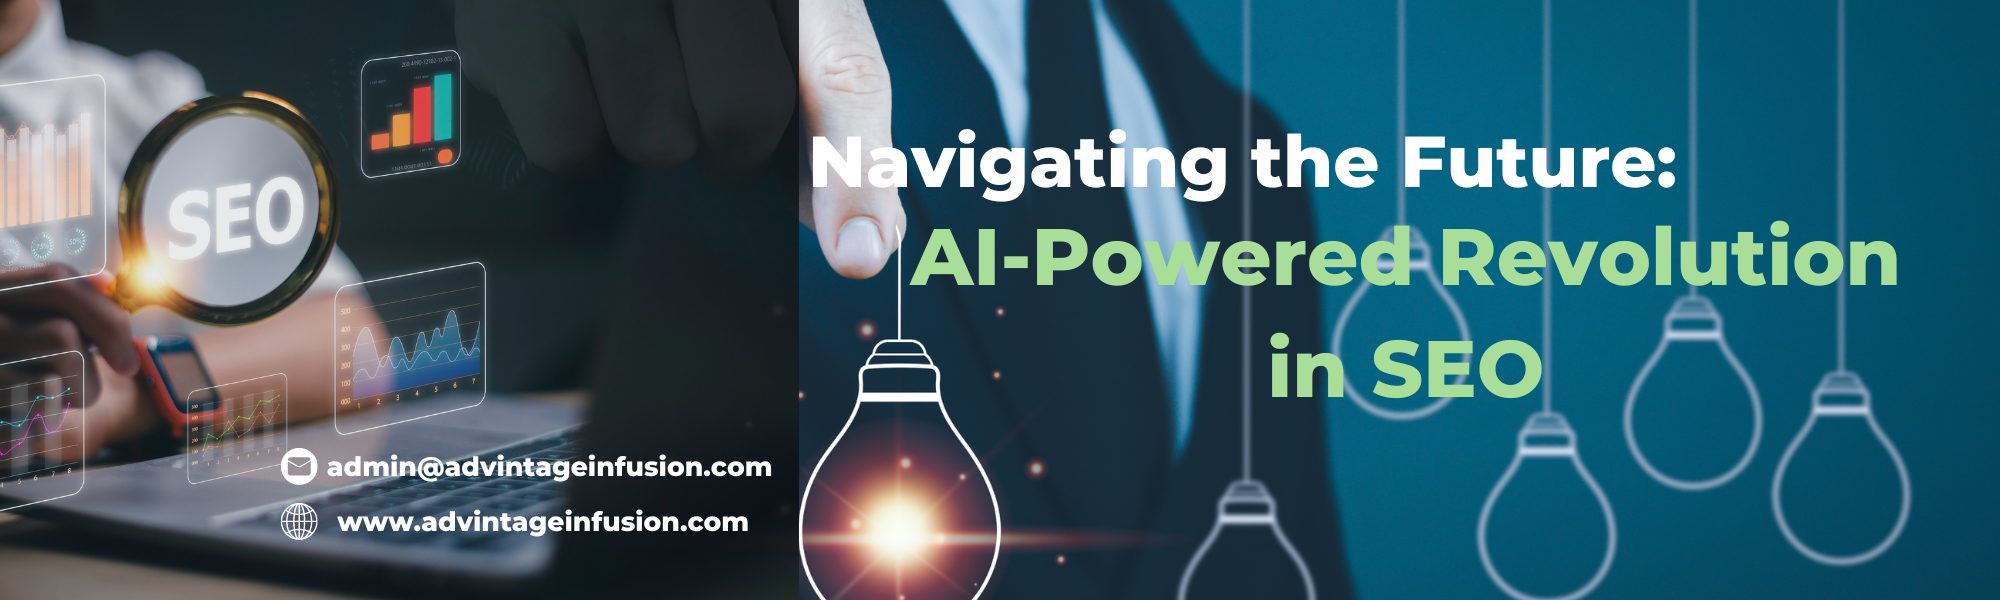 Navigating the Future: AI-Powered Revolution in SEO